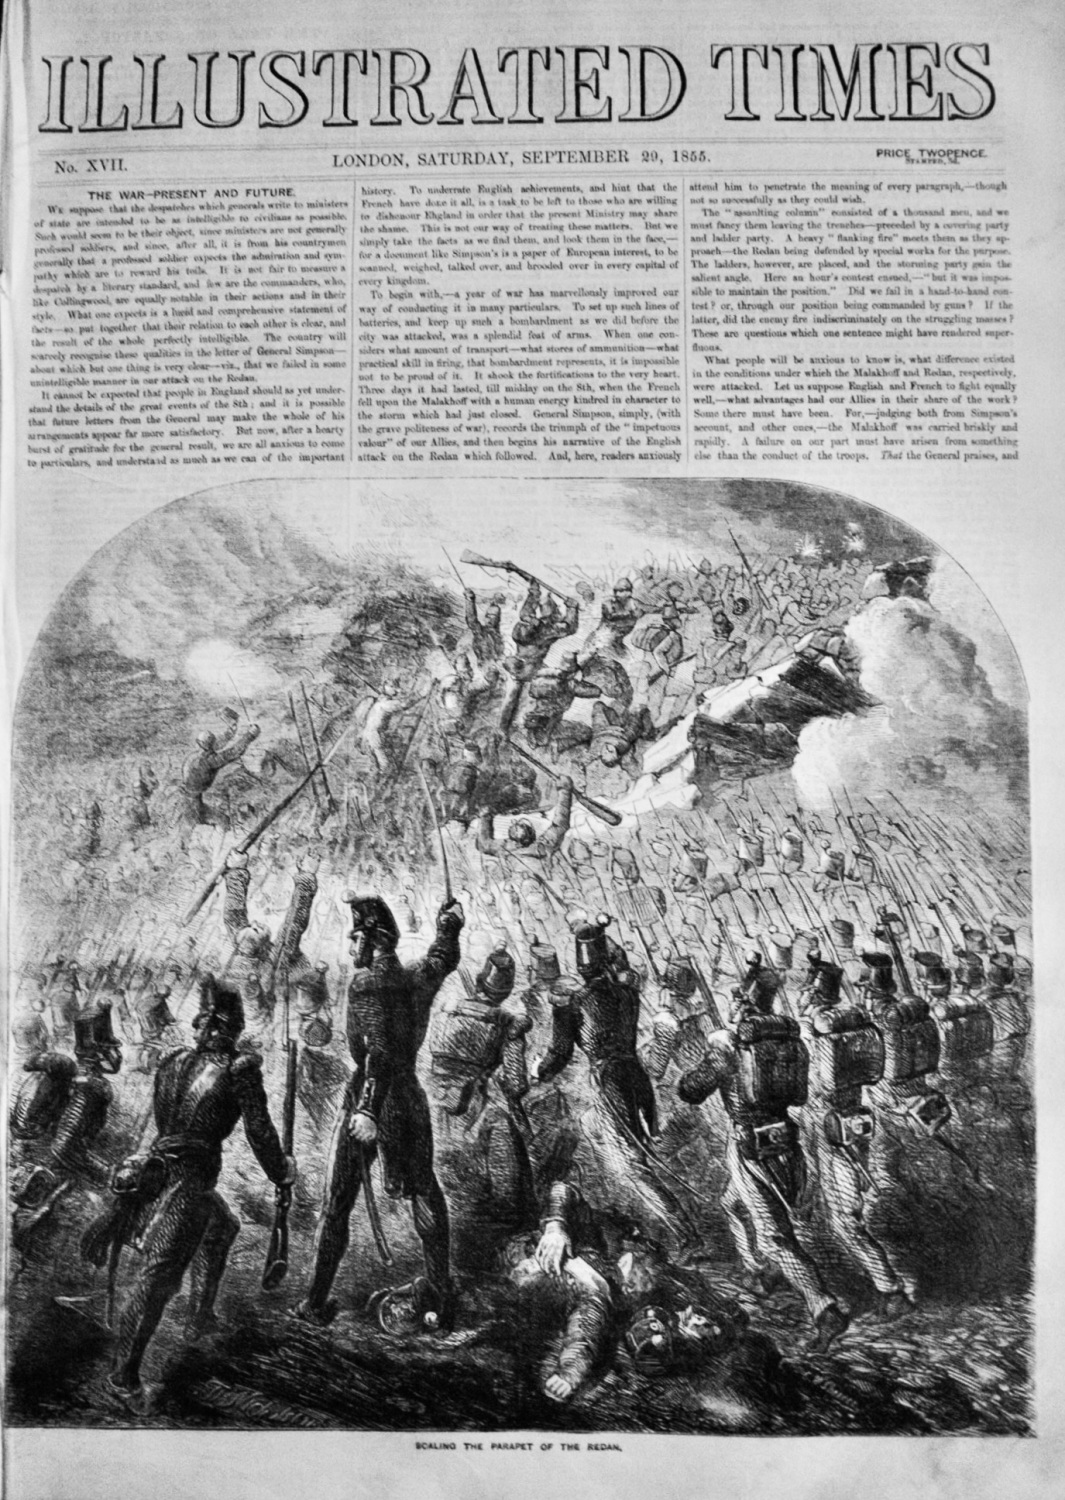 Illustrated Times, September 29th, 1855.